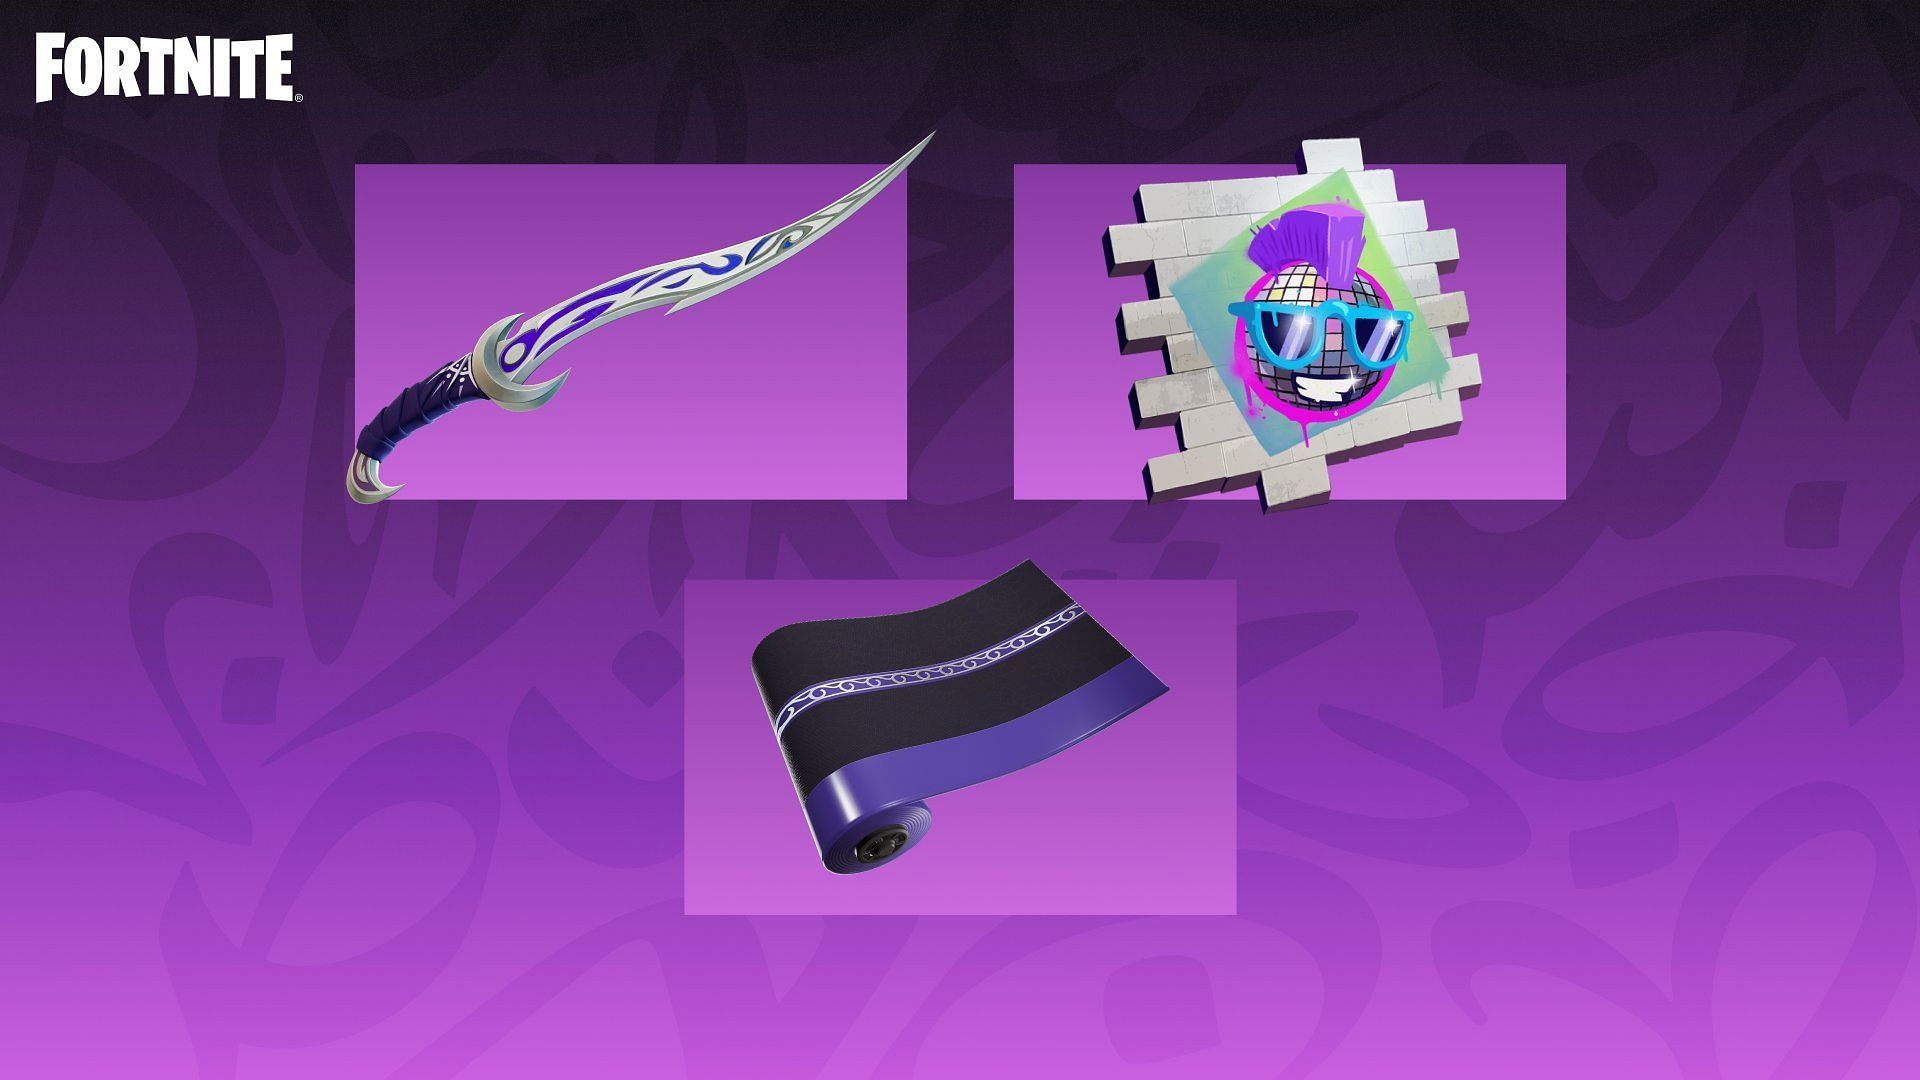 How to get The Nightblade Pickaxe, Moonlit Peace Wrap, and Disco Baller Spray for free in Fortnite